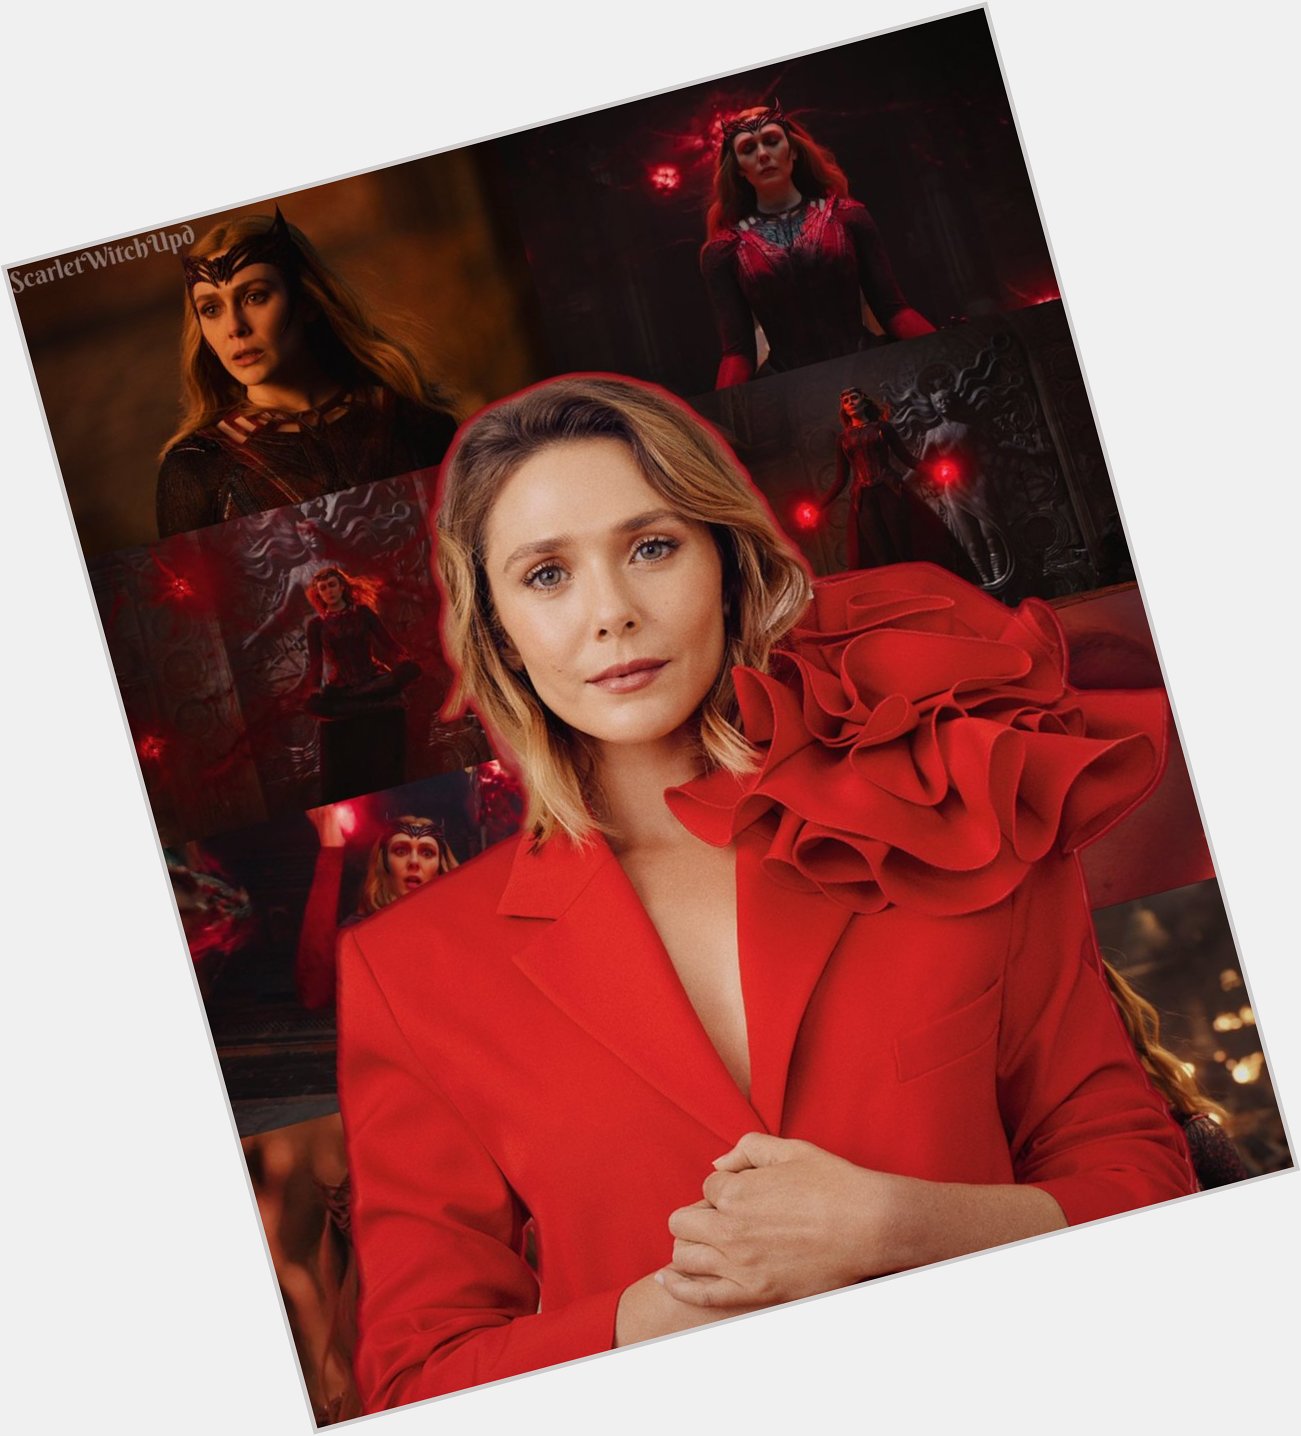 Happy 34th birthday to Elizabeth Olsen, our most powerful Avenger Scarlet Witch! 